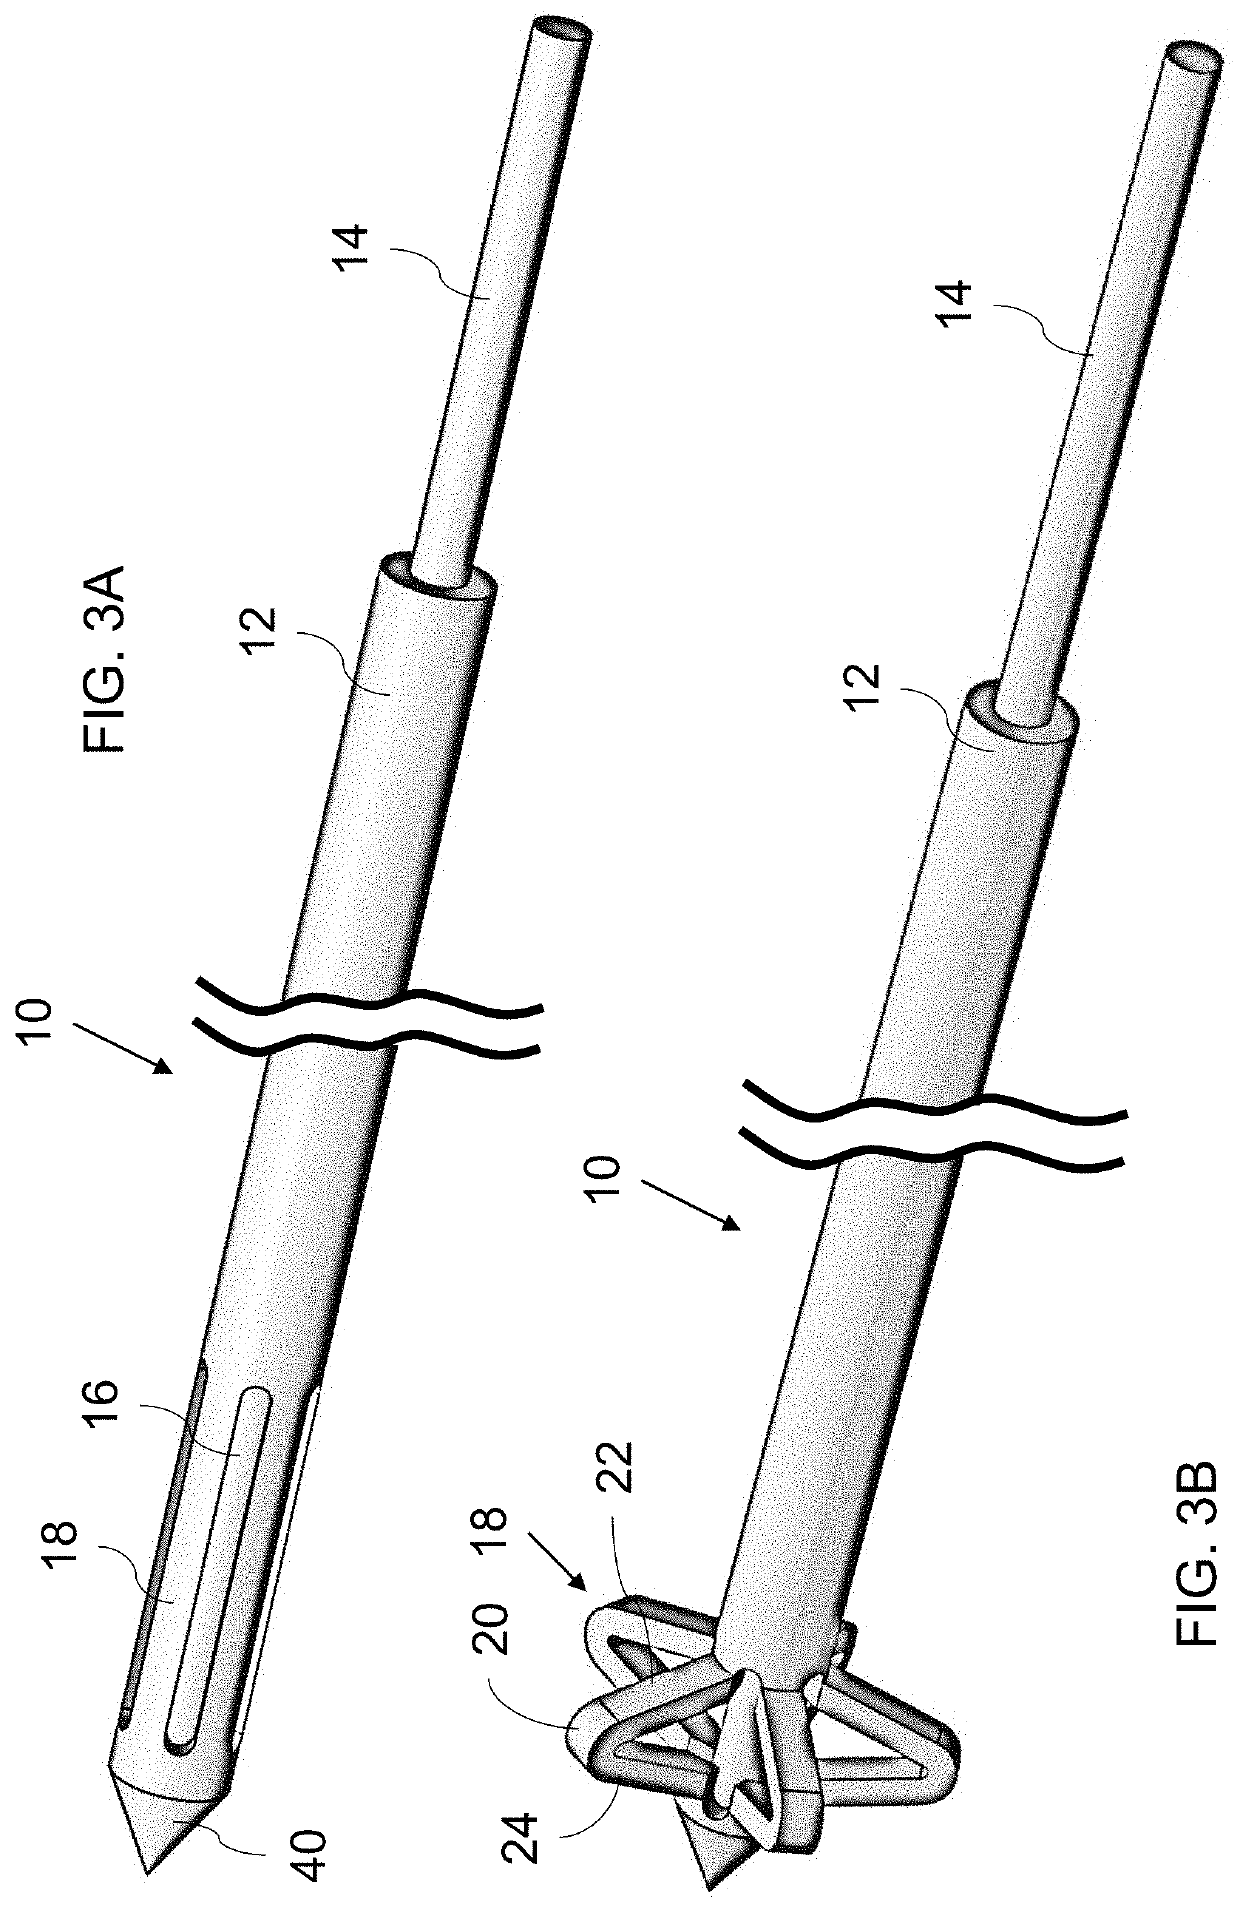 Stiff guide wire with anchoring configuration